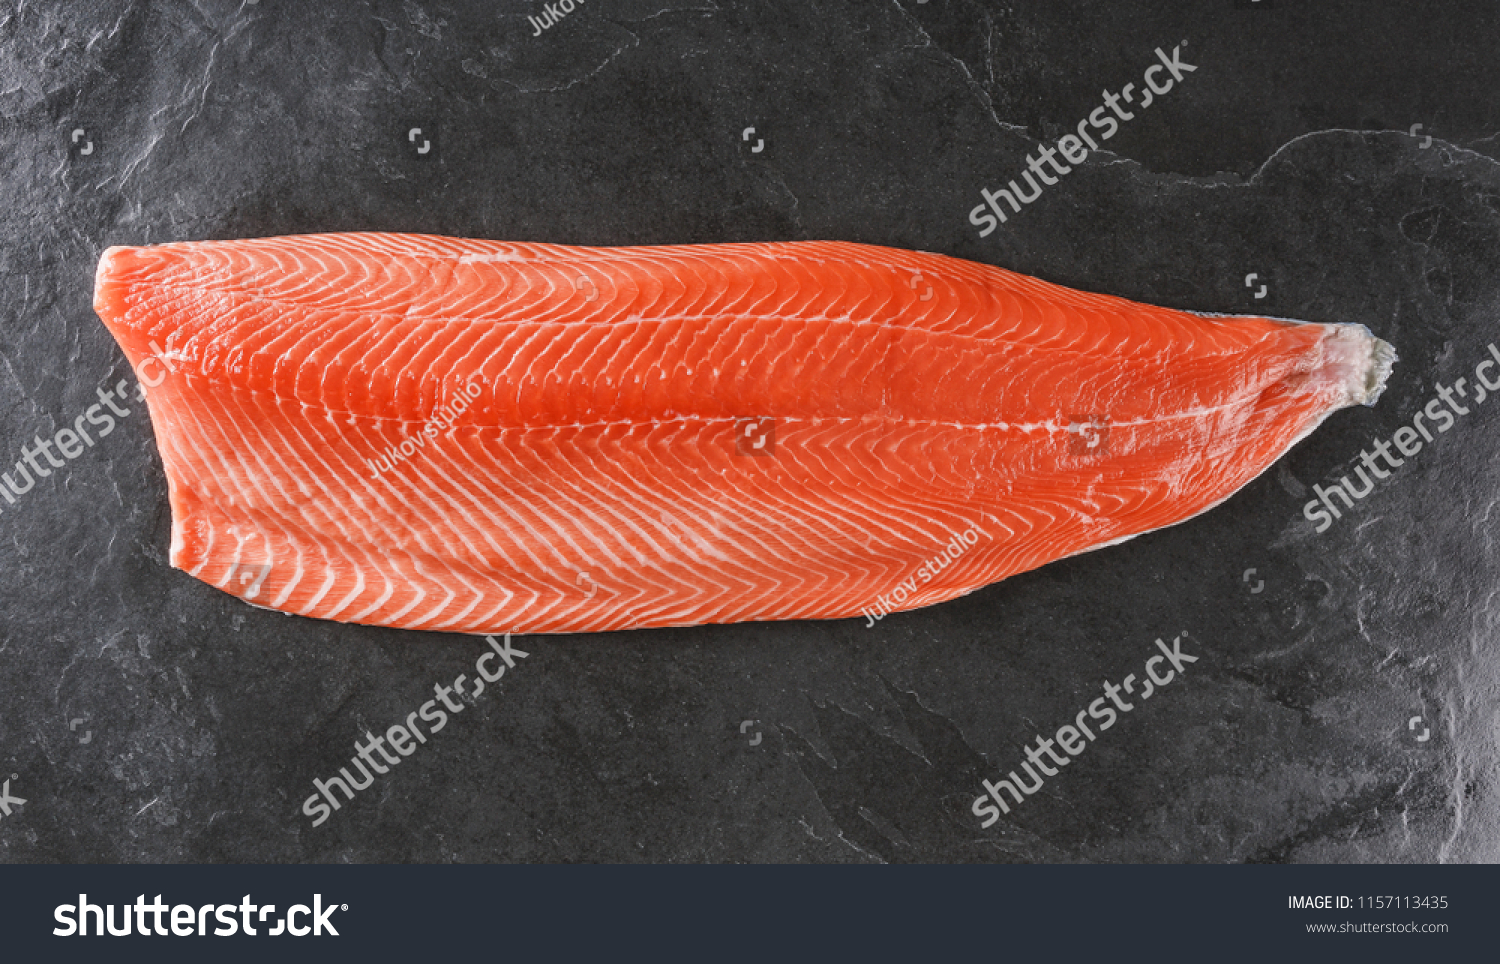 Fresh raw salmon fish steak with spices on ice over dark stone background. Creative layout made of fish, top view, flat lay #1157113435